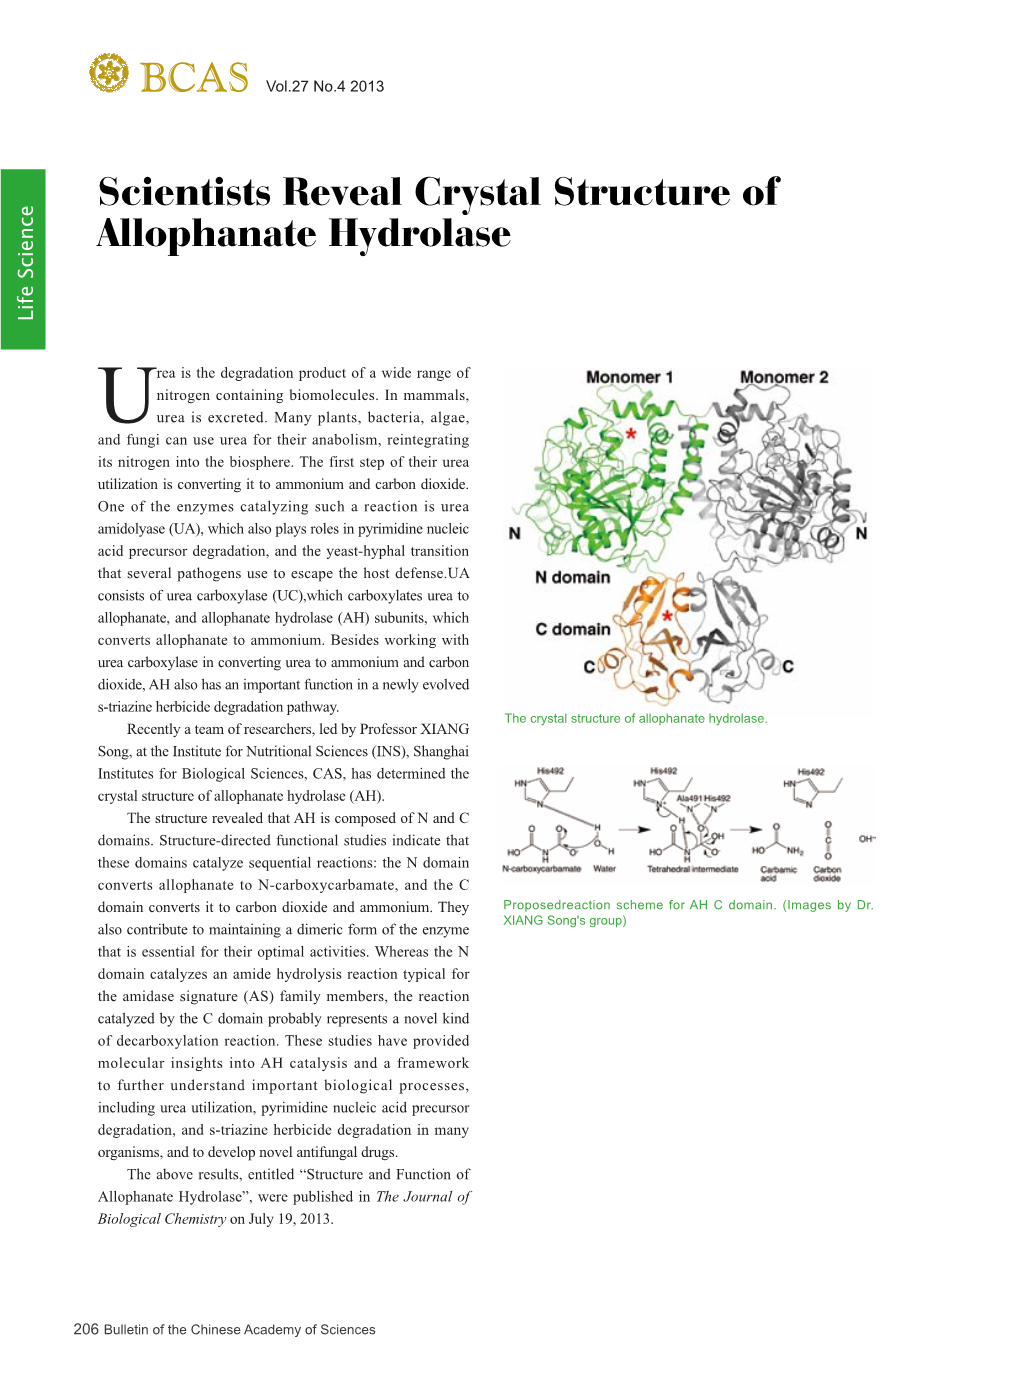 206 Scientists Reveal Crystal Structure of Allophanate Hydrolase